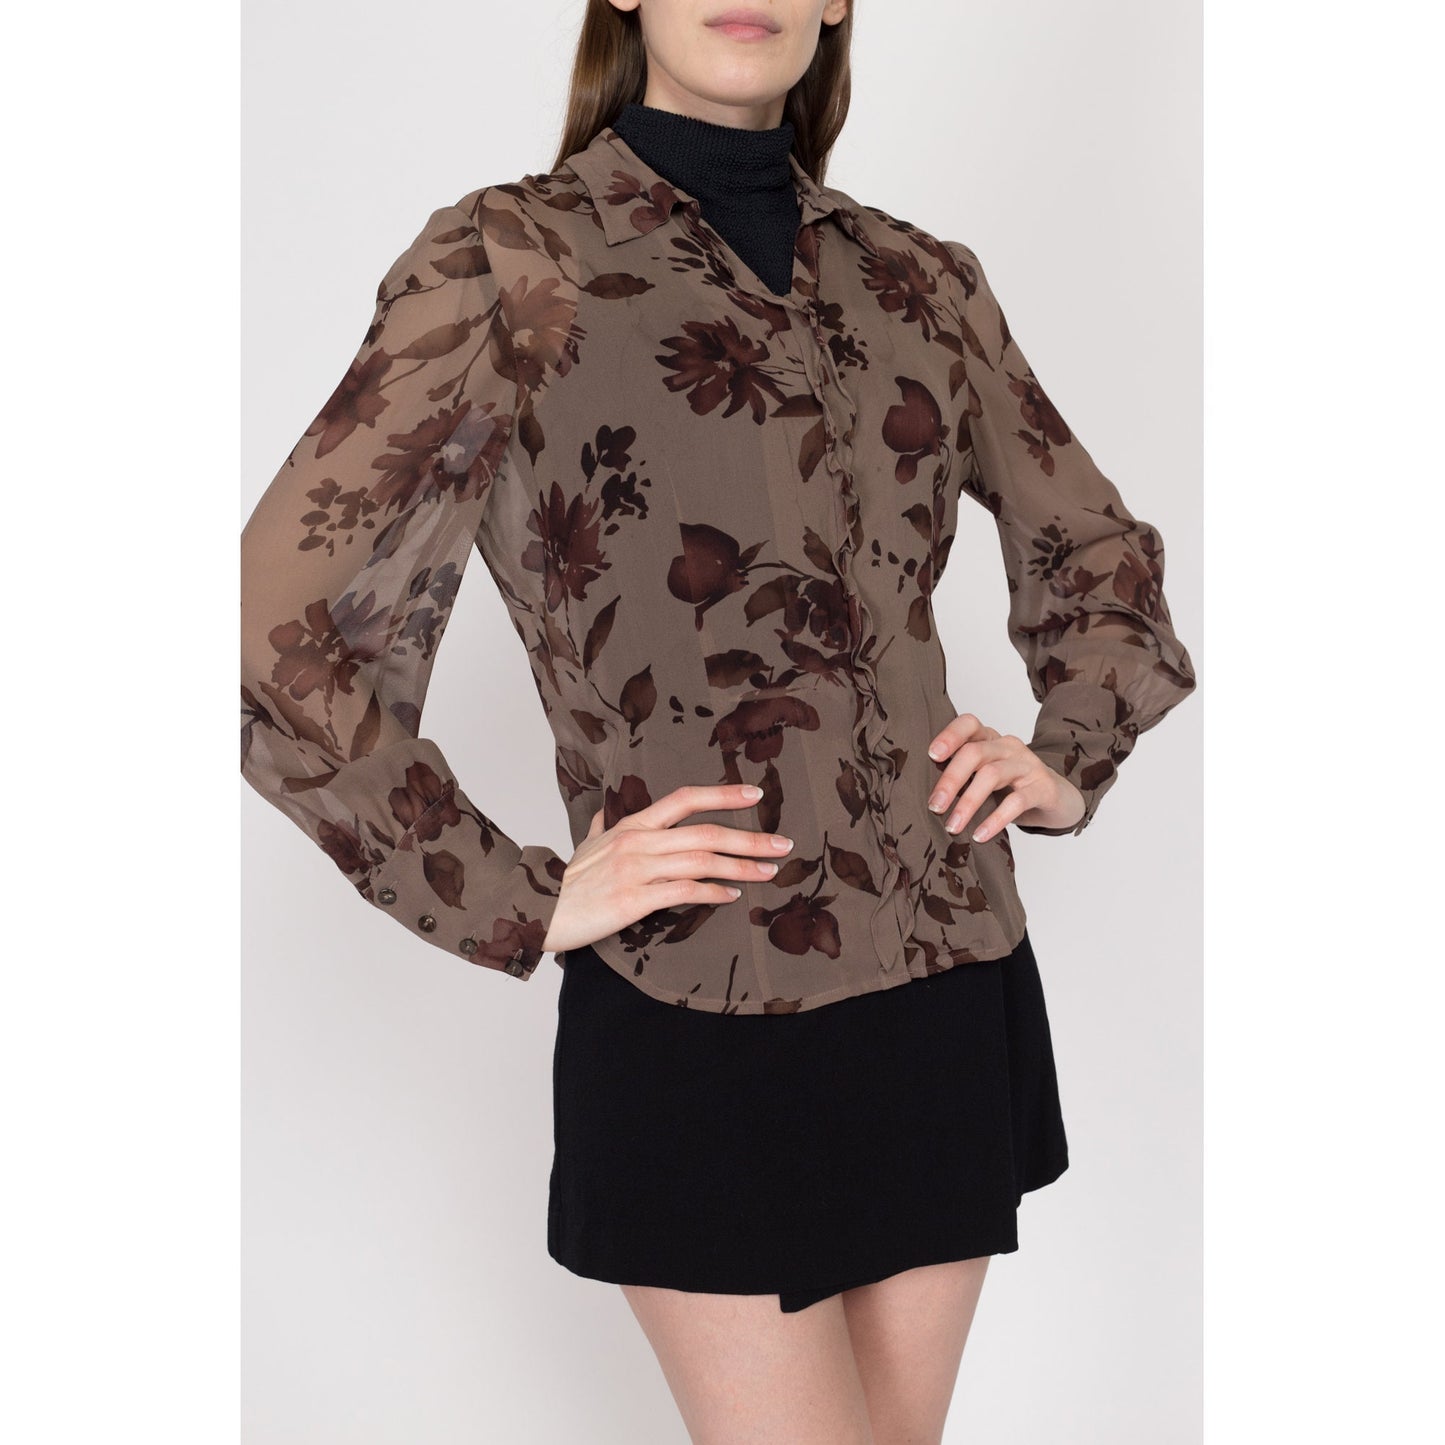 Large 90s Sheer Silk Brown Floral Blouse | Vintage Long Sleeve Button Up Top